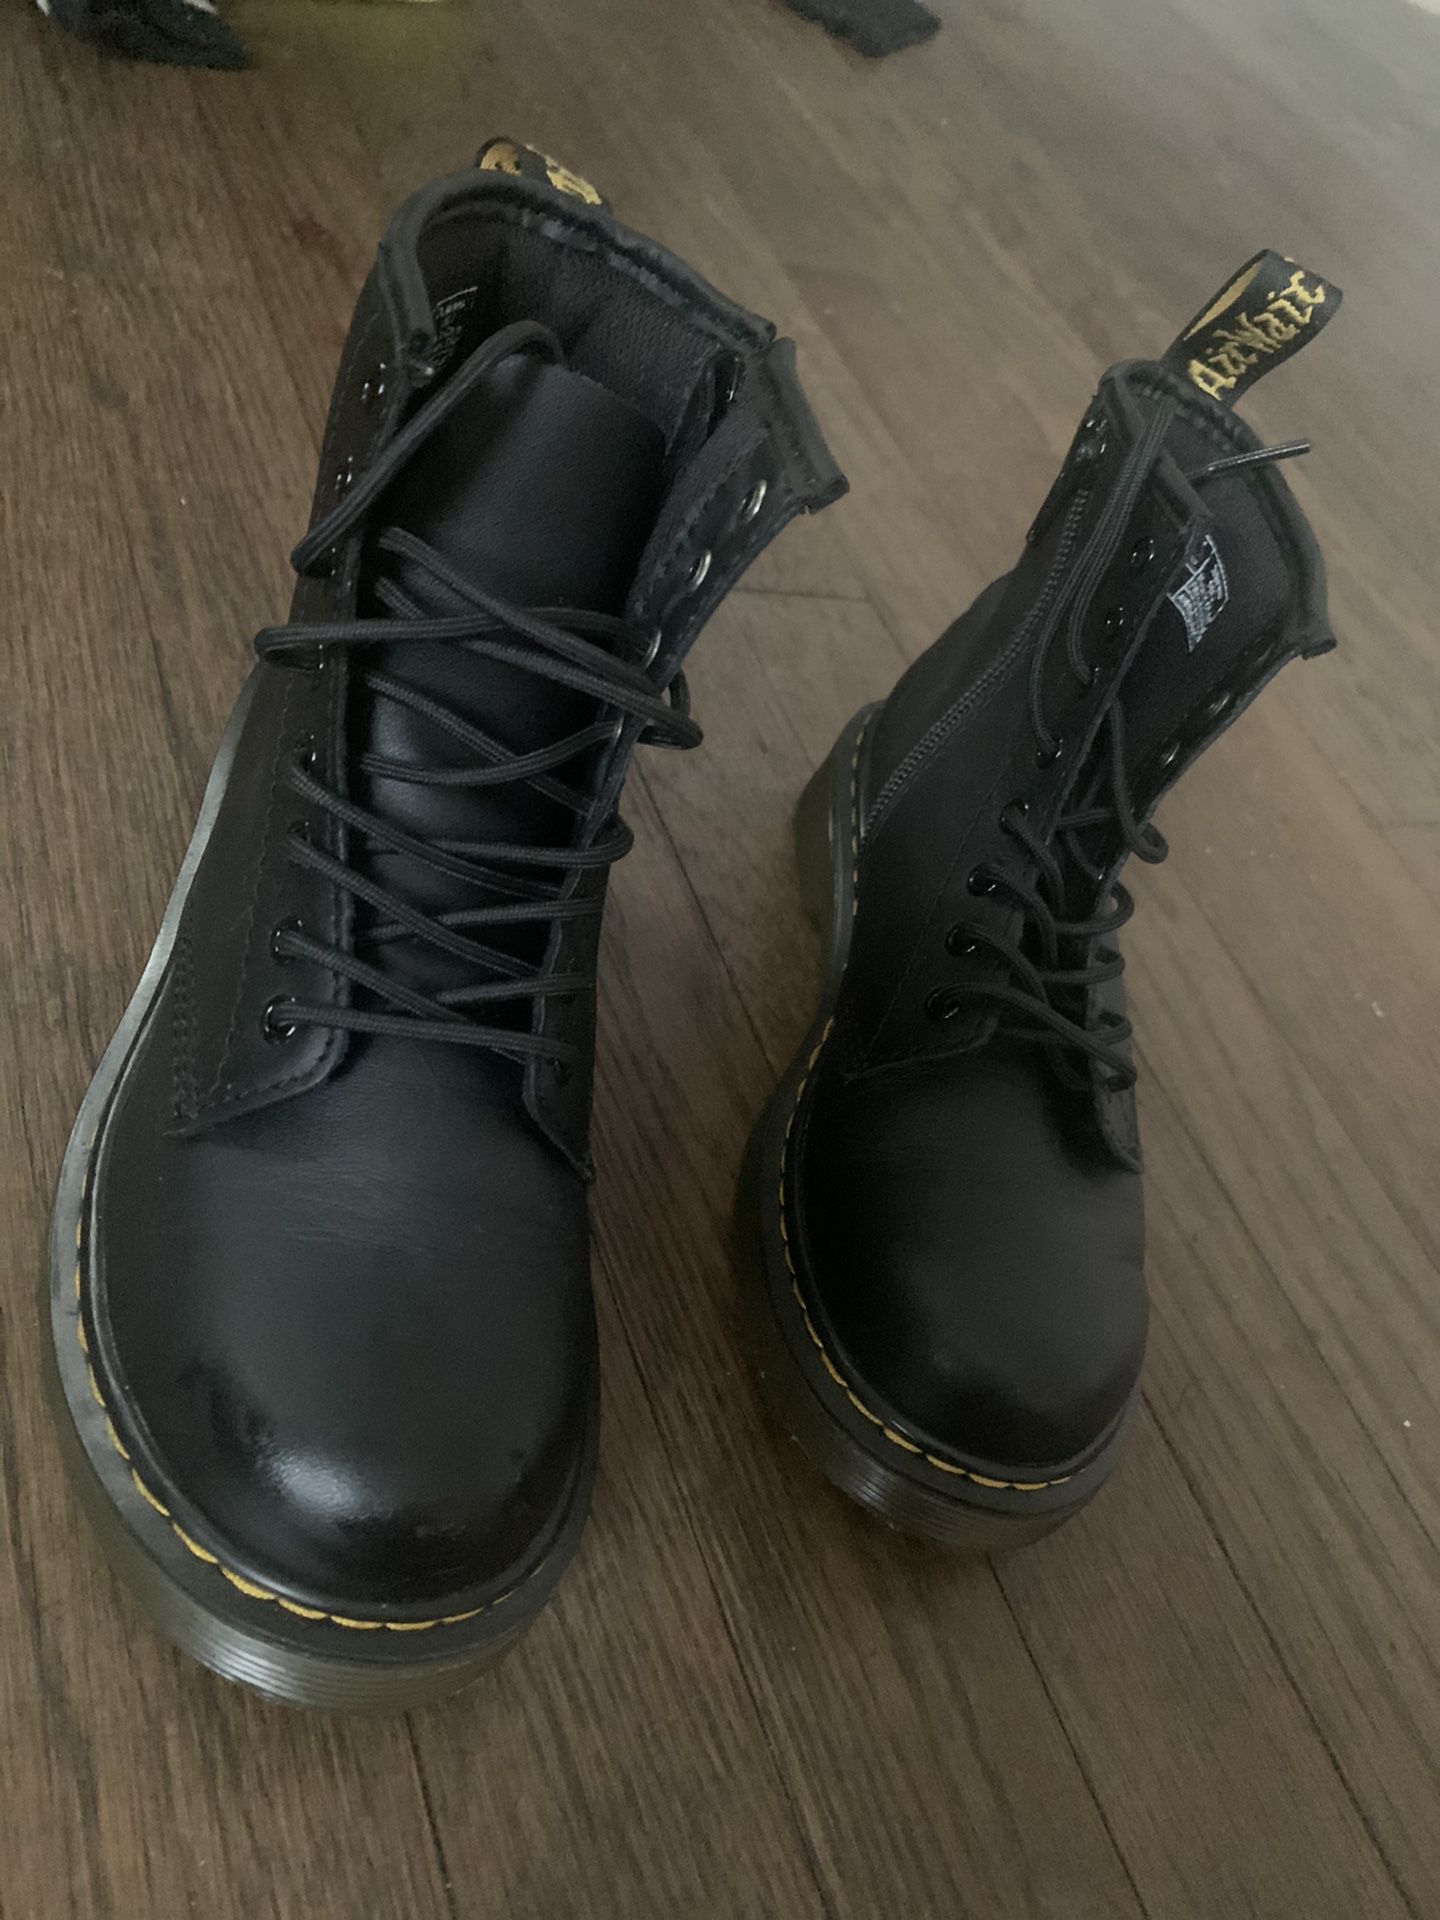 Brand New Kids Dr Martens boots size 1